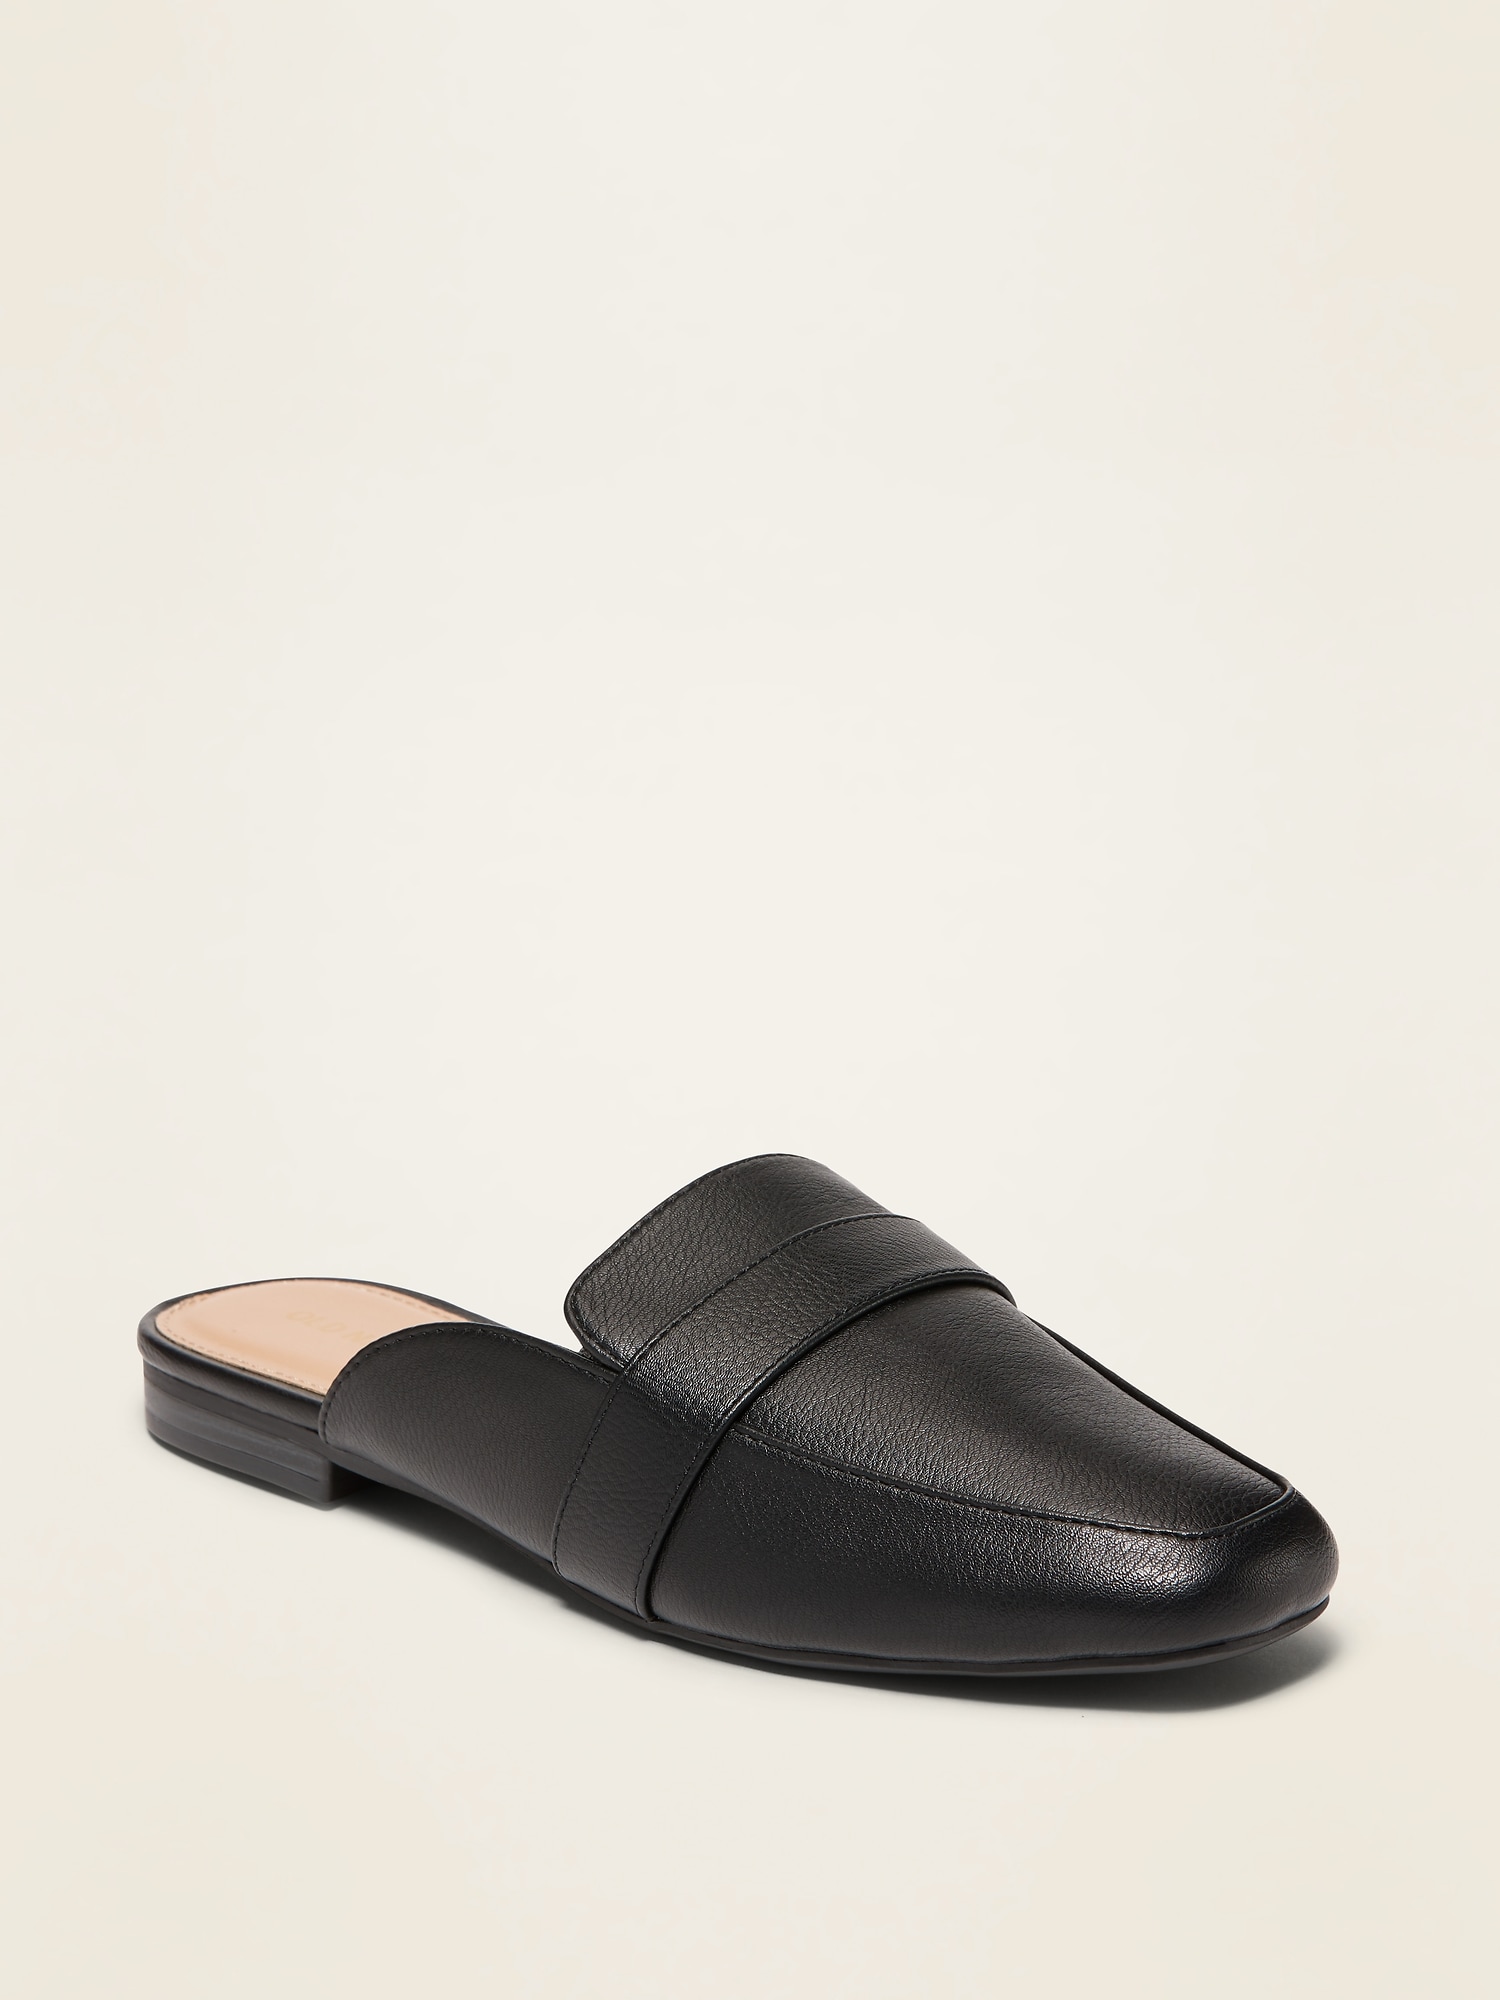 Faux-Leather Driving Mule Flats for 